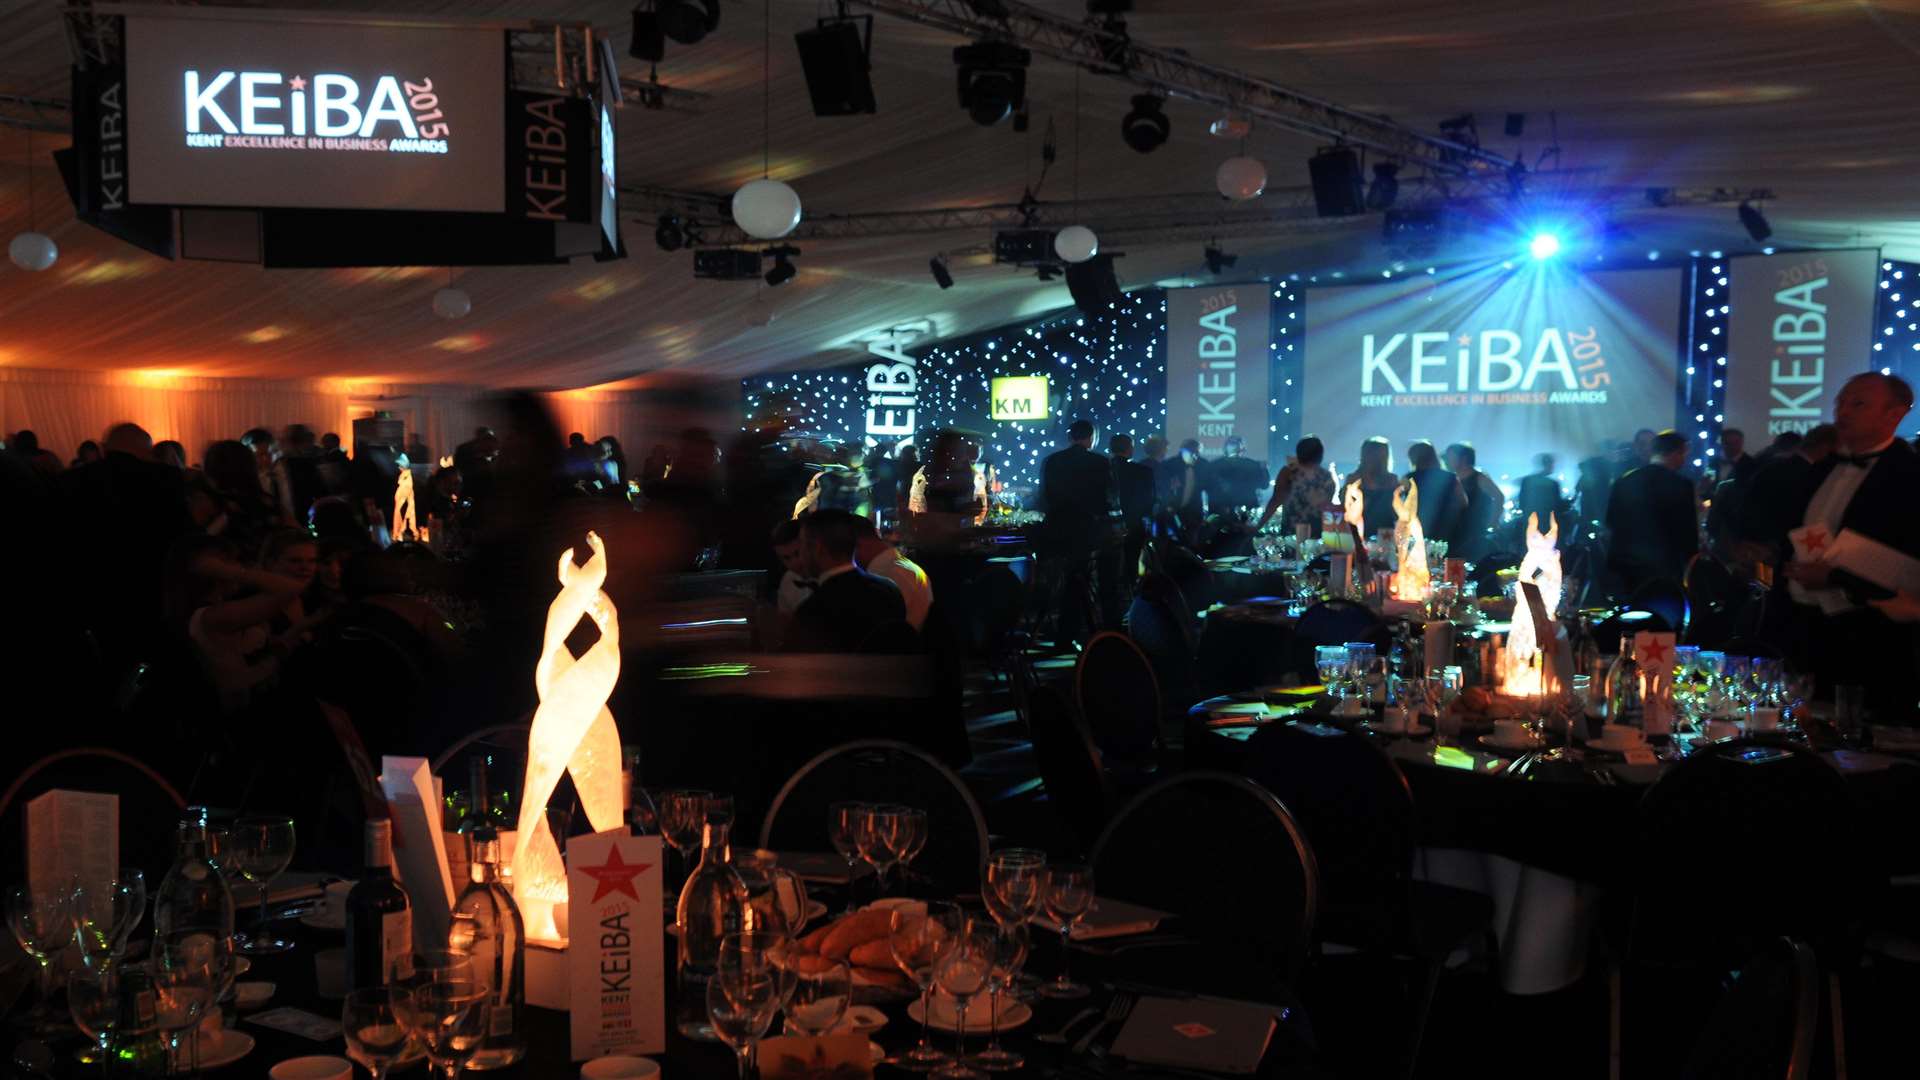 The KEiBA gala night takes place in June